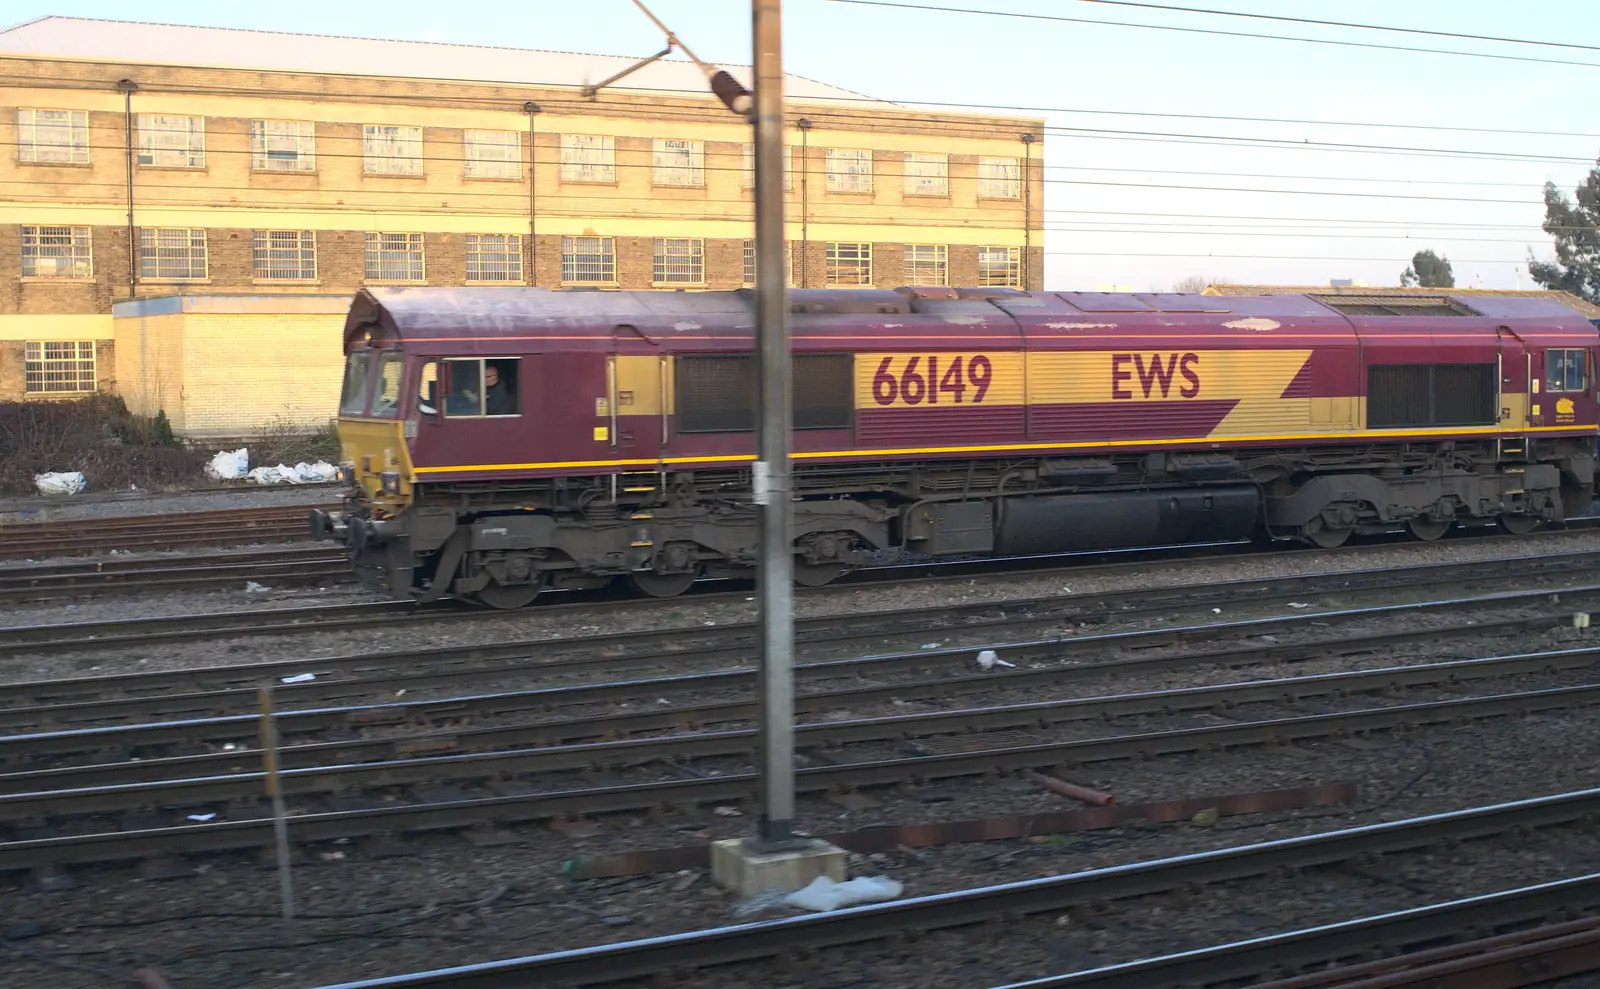 An EWS Class 66, 66149 at Ipswich Goods Junction, from Demolition of the Bacon Factory, and Railway Dereliction, Ipswich and London - 5th March 2013